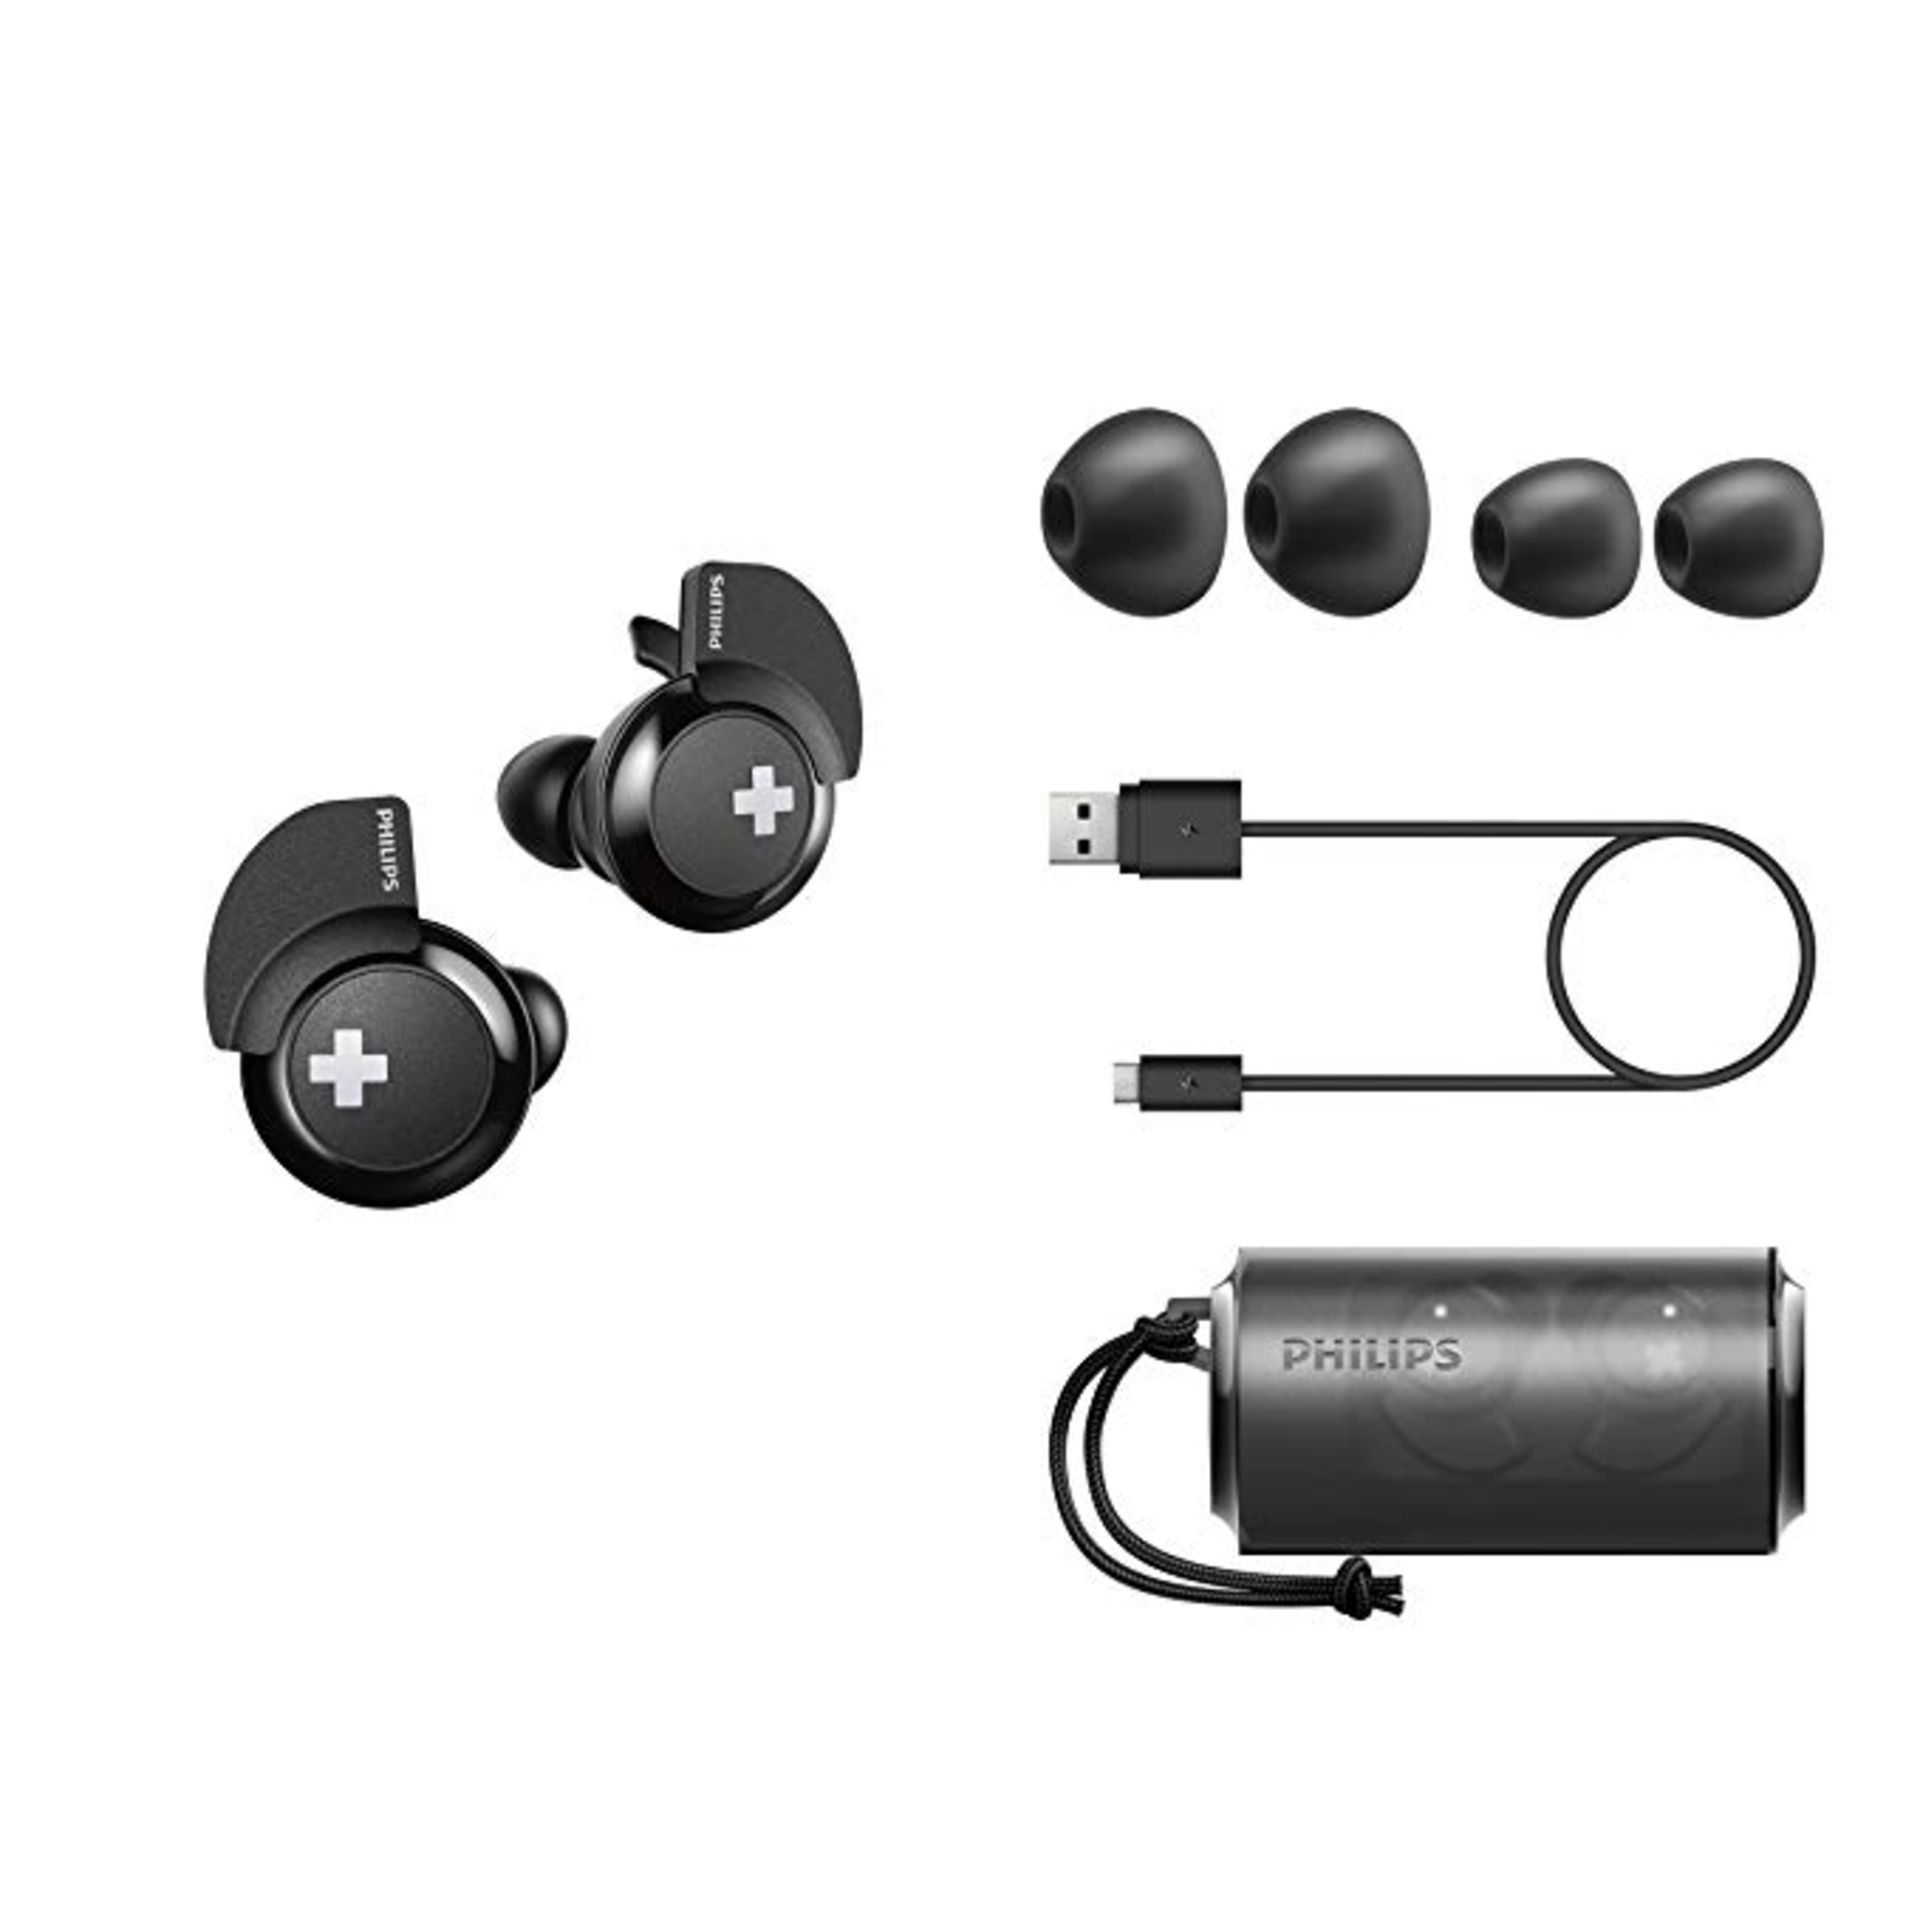 V Grade A Philips Bass + SHB4385 Truly Wireless Earphones With Charging Case - 6 Hours Play Time - 6